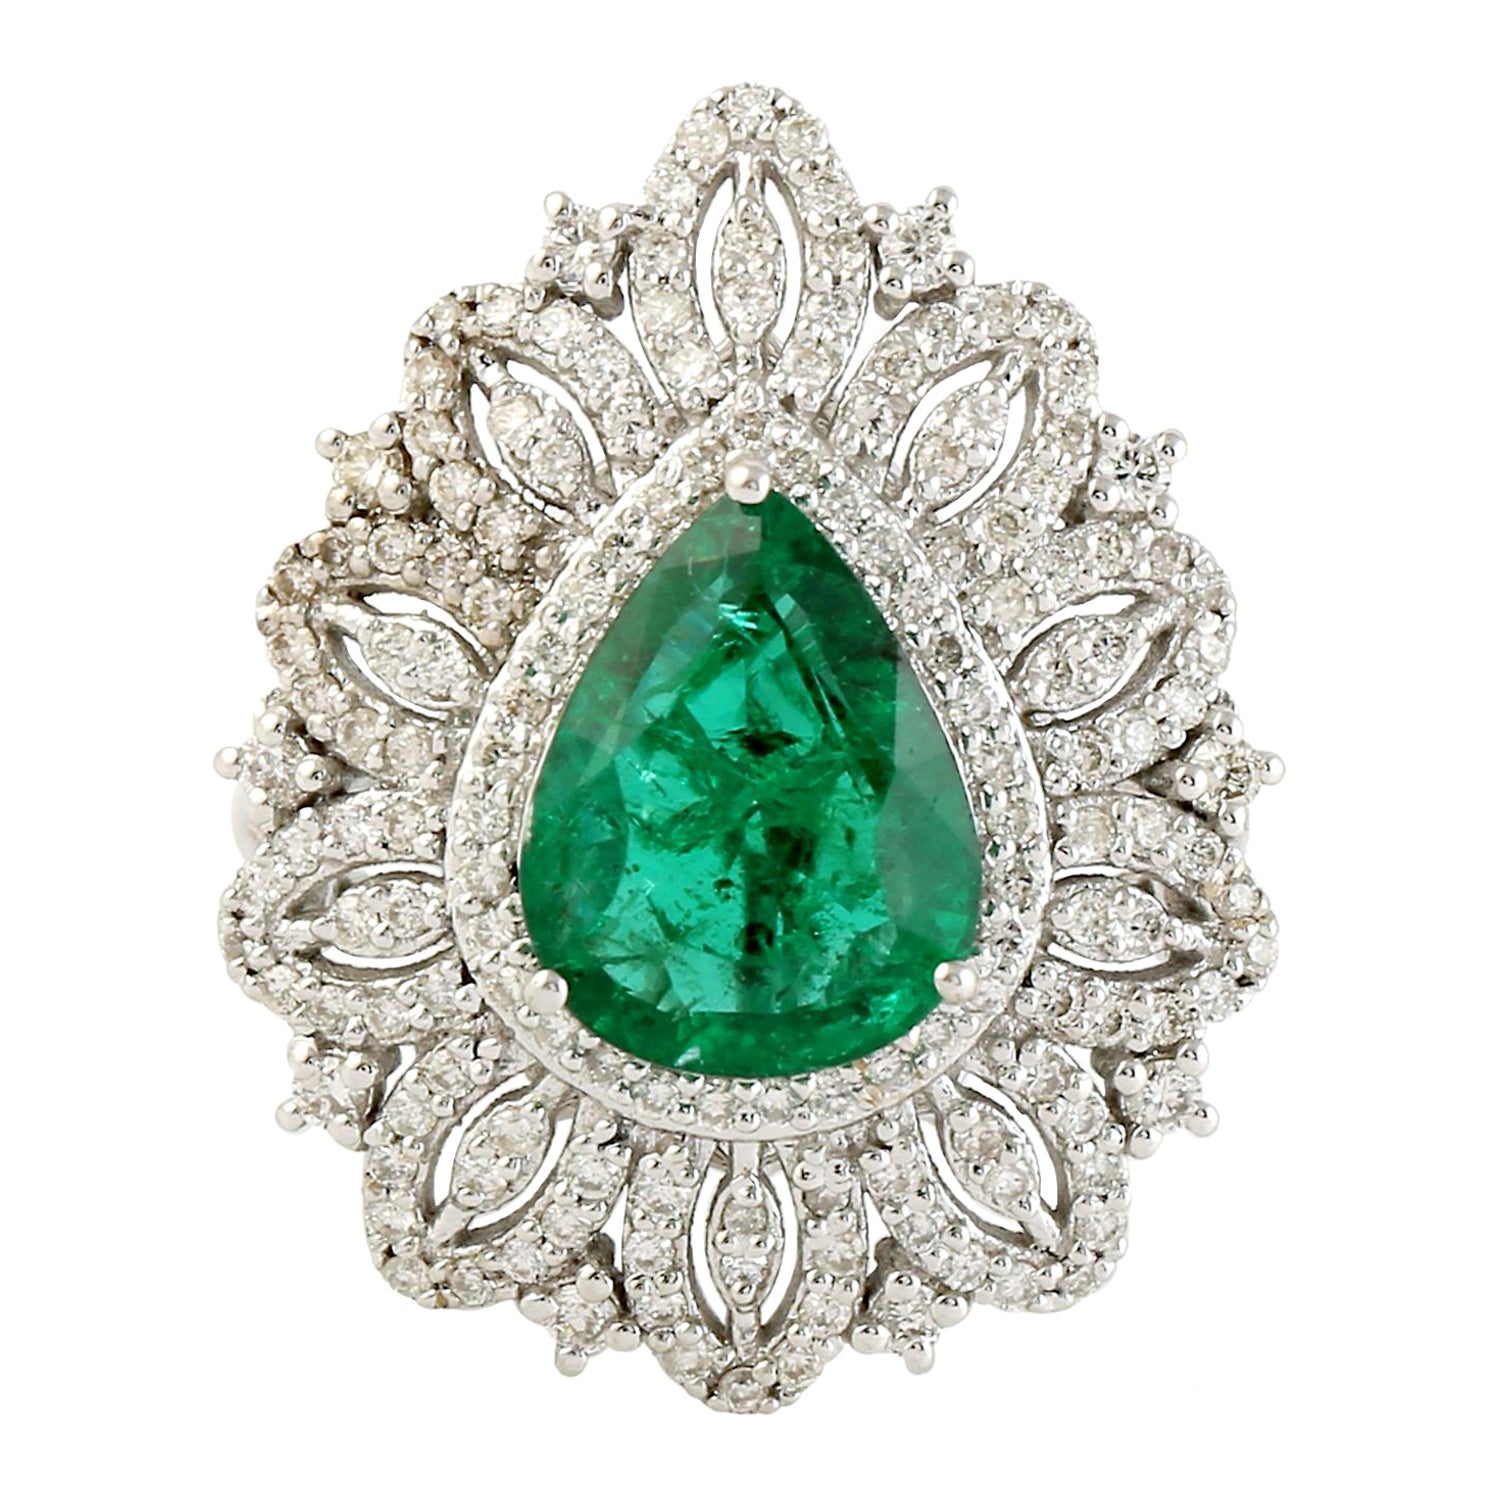 2.98 ct Pear Shaped Zambian Emerald Ring With Diamonds Made in 18k White Gold For Sale